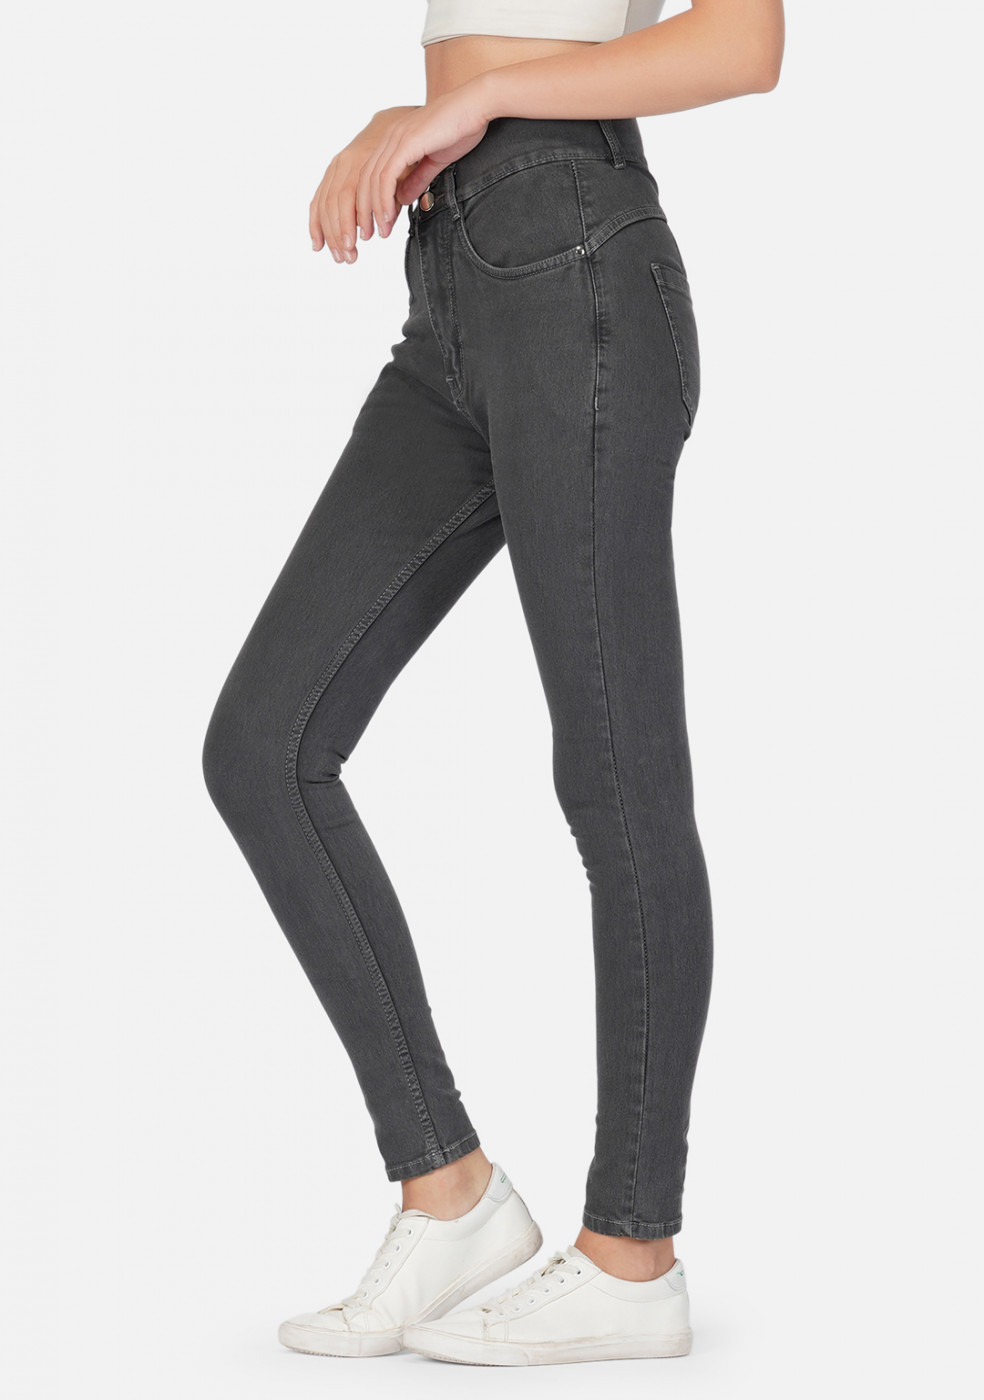 Gray Stretchable Cotton Jeans For Women